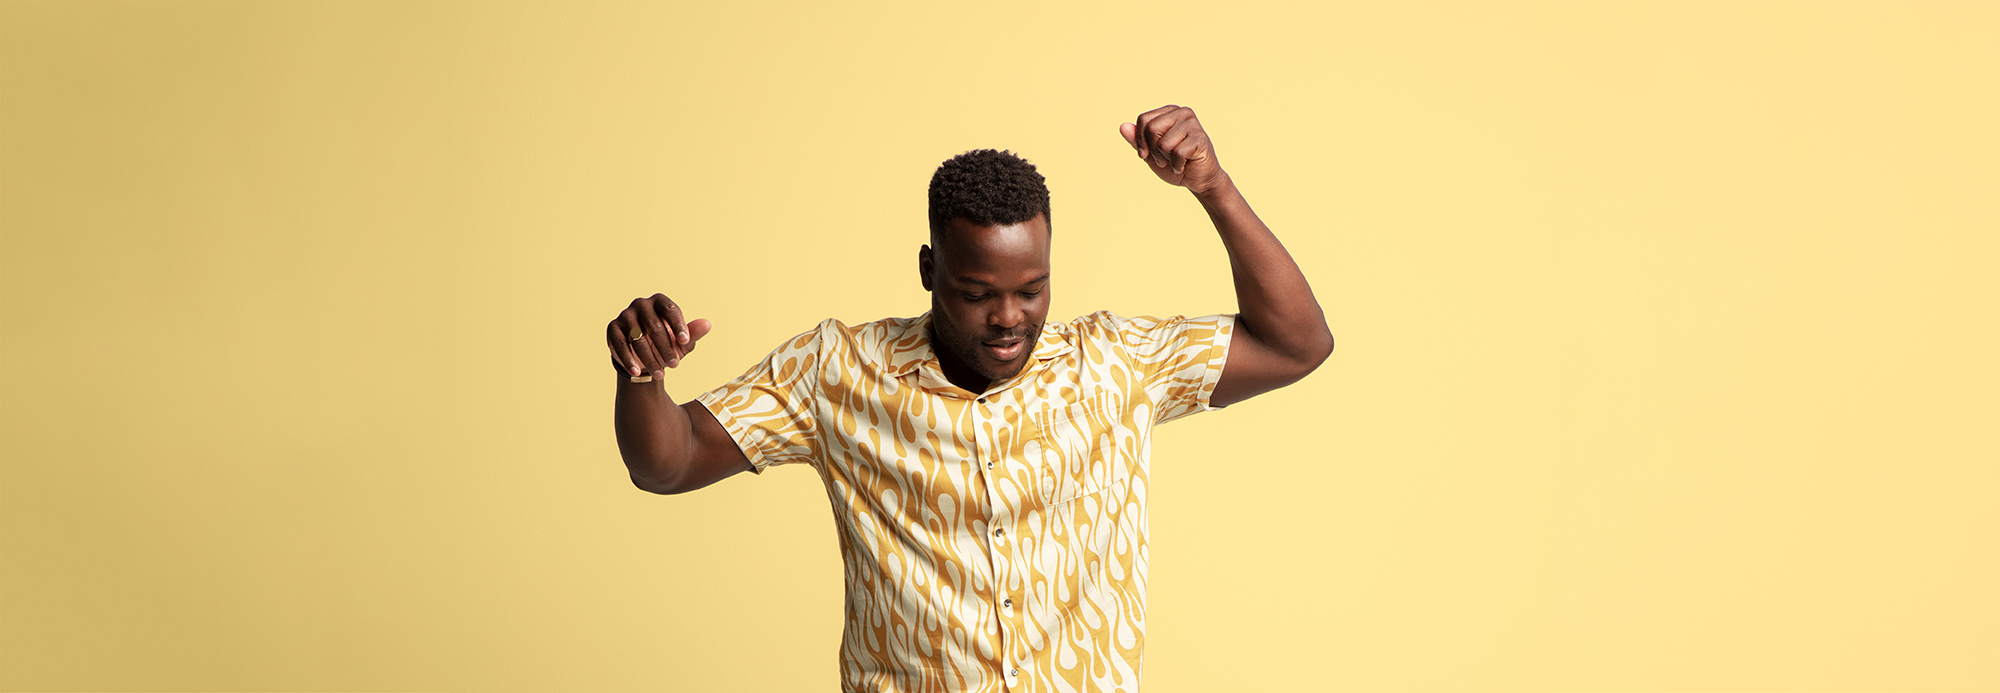 A man modeling a short sleeved shirt with a yellow and white flame pattern on it